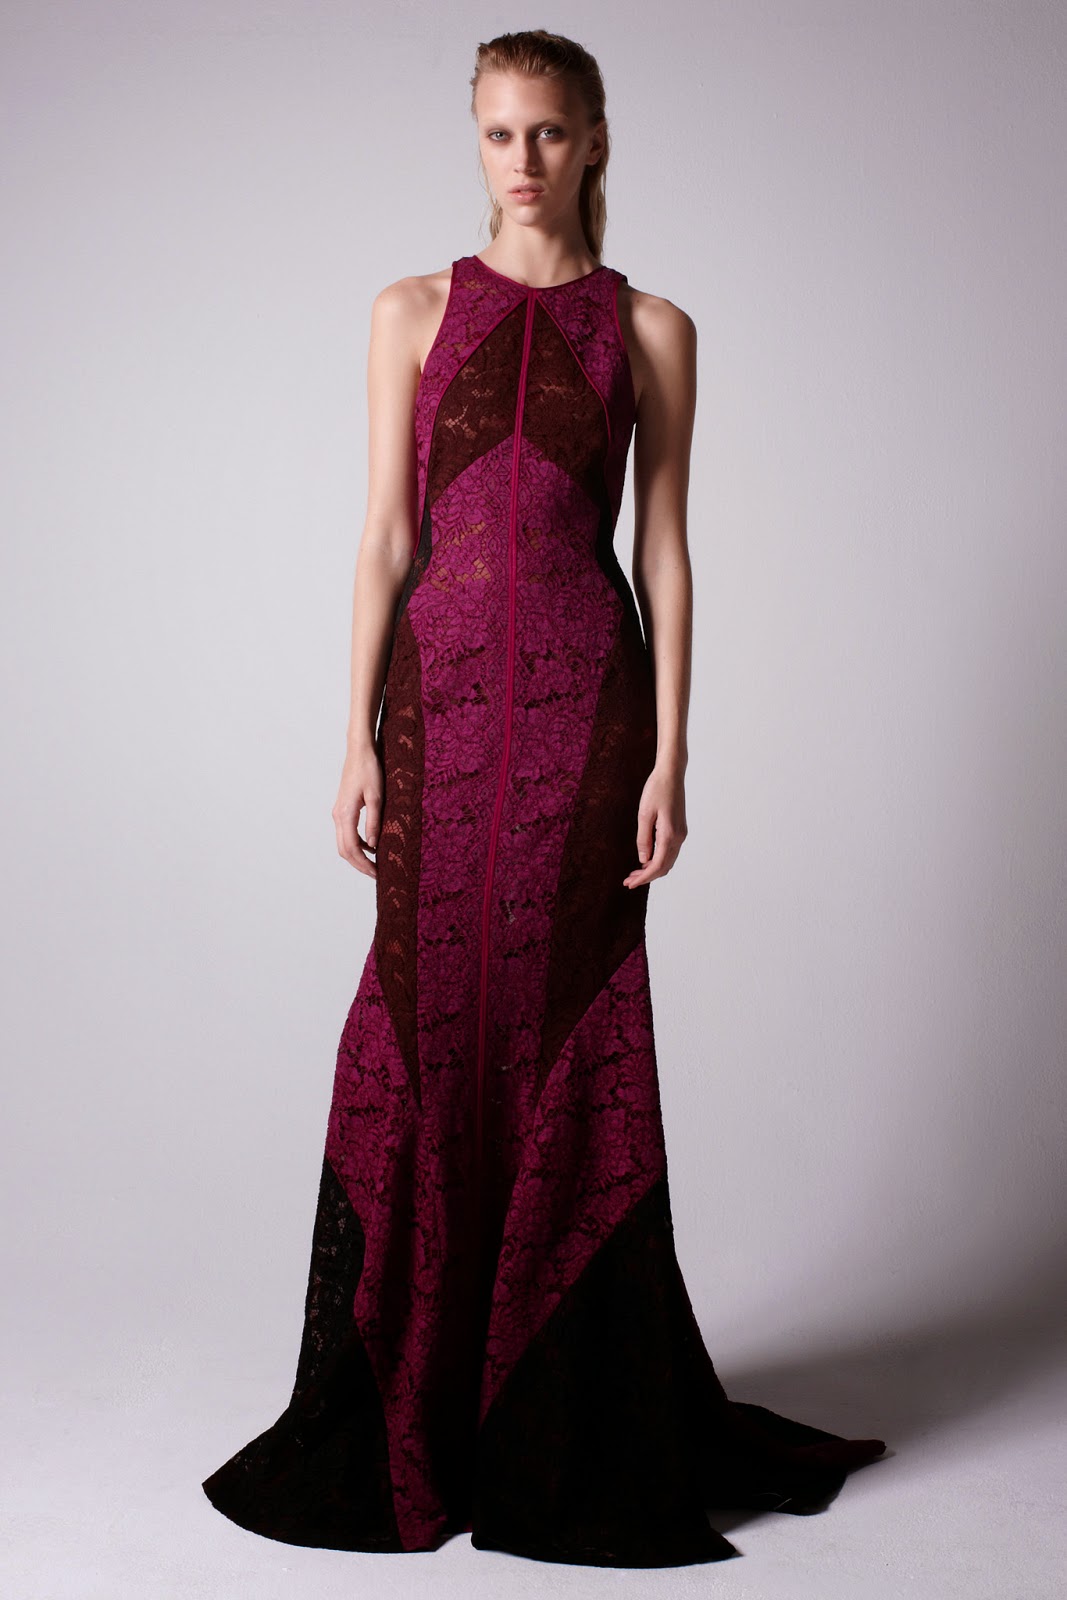 Serendipitylands: J. MENDEL COLLECTION PRE-FALL 2015